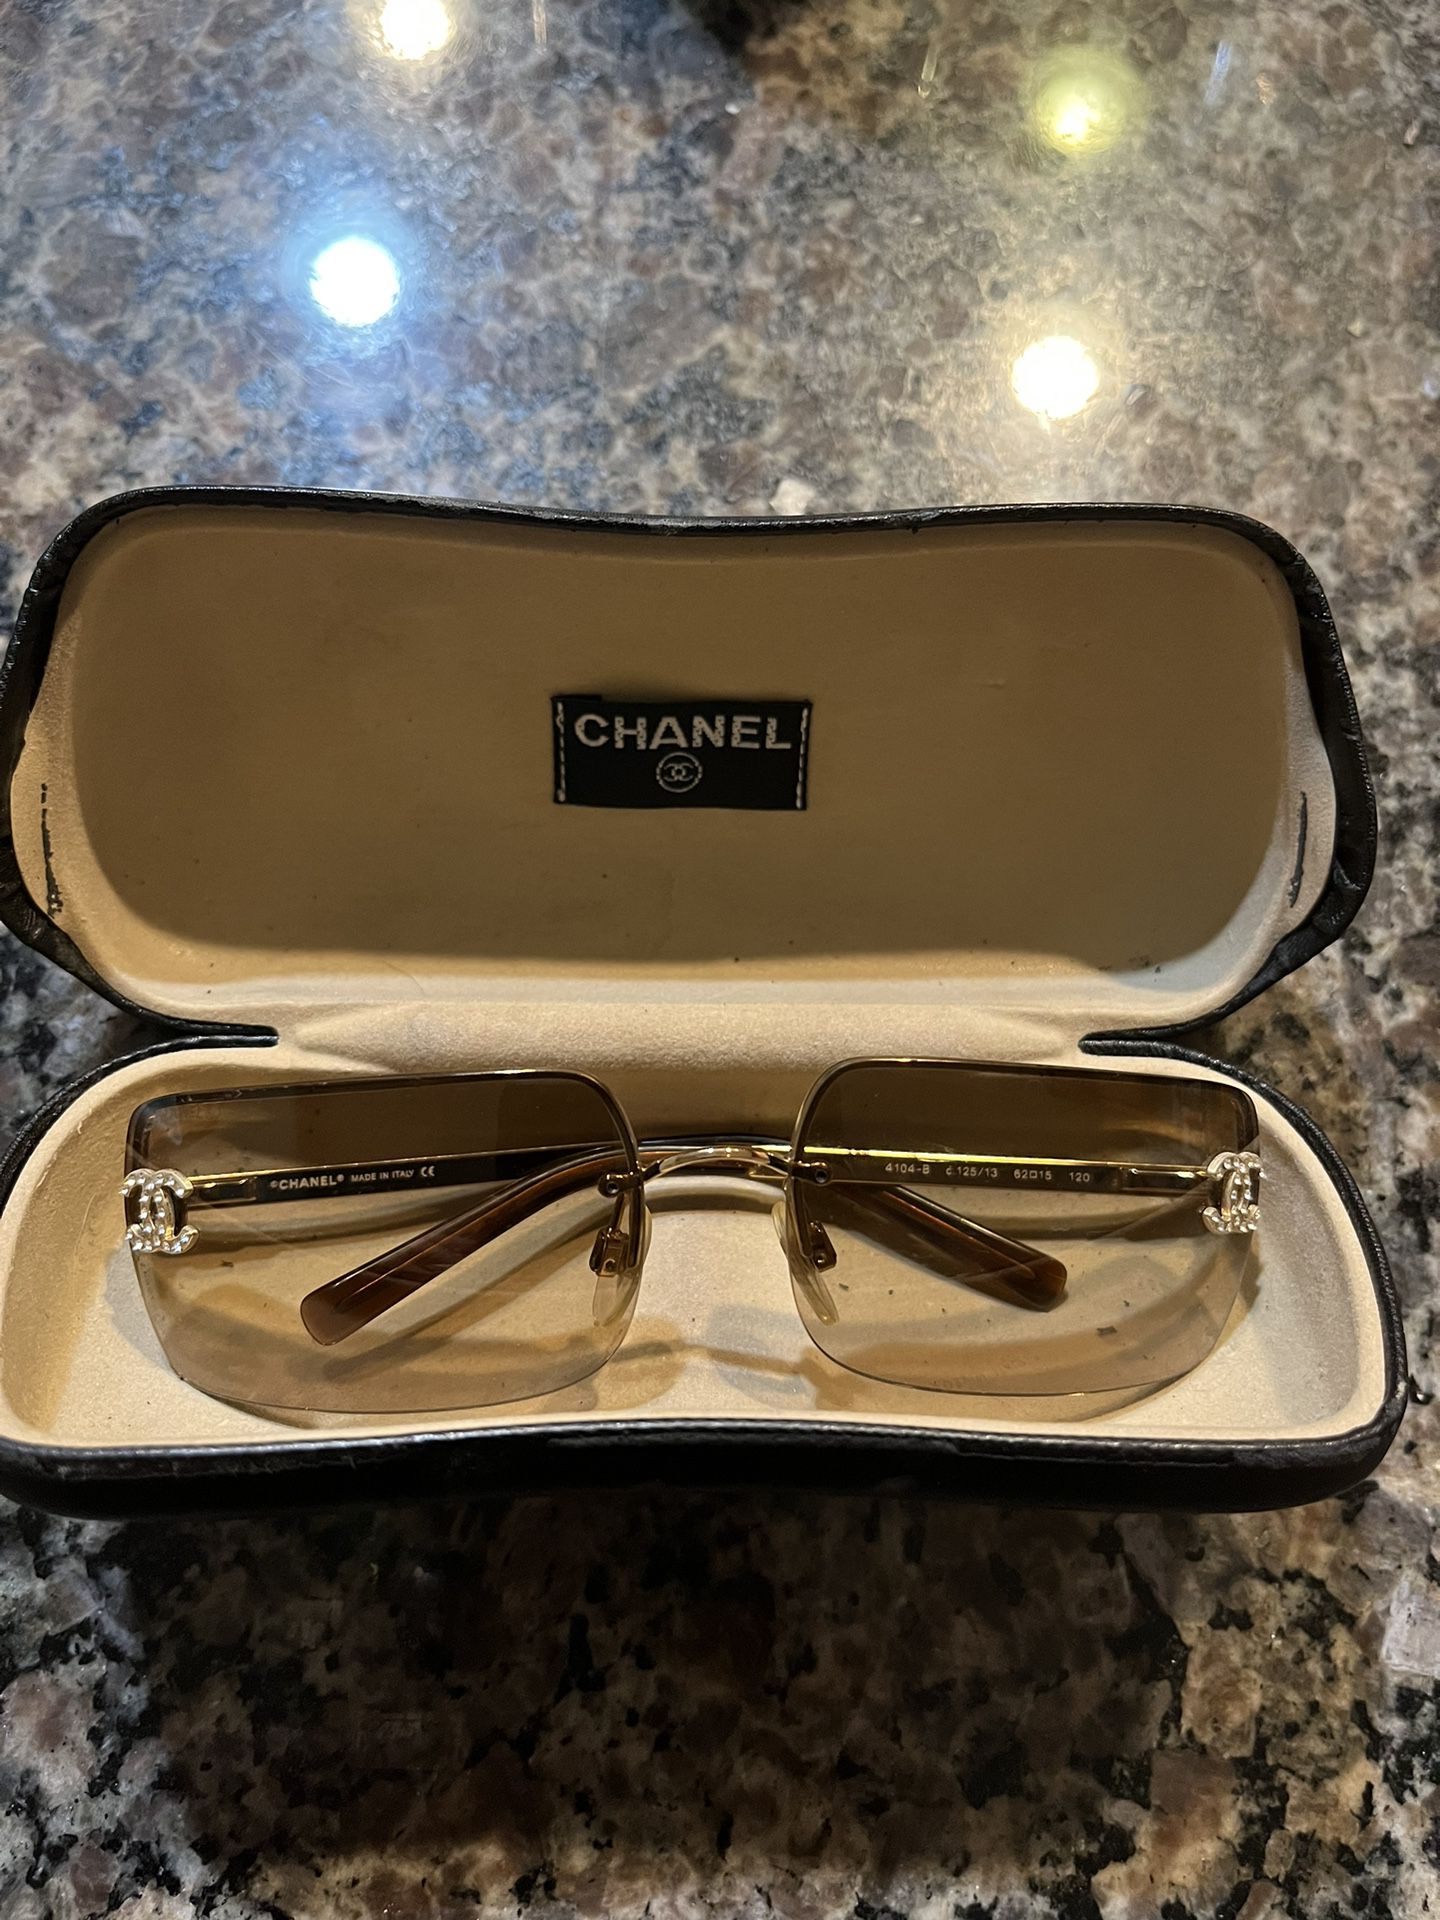 Chanel Sunglasses (early 2000s) for Sale in Carlsbad, CA - OfferUp